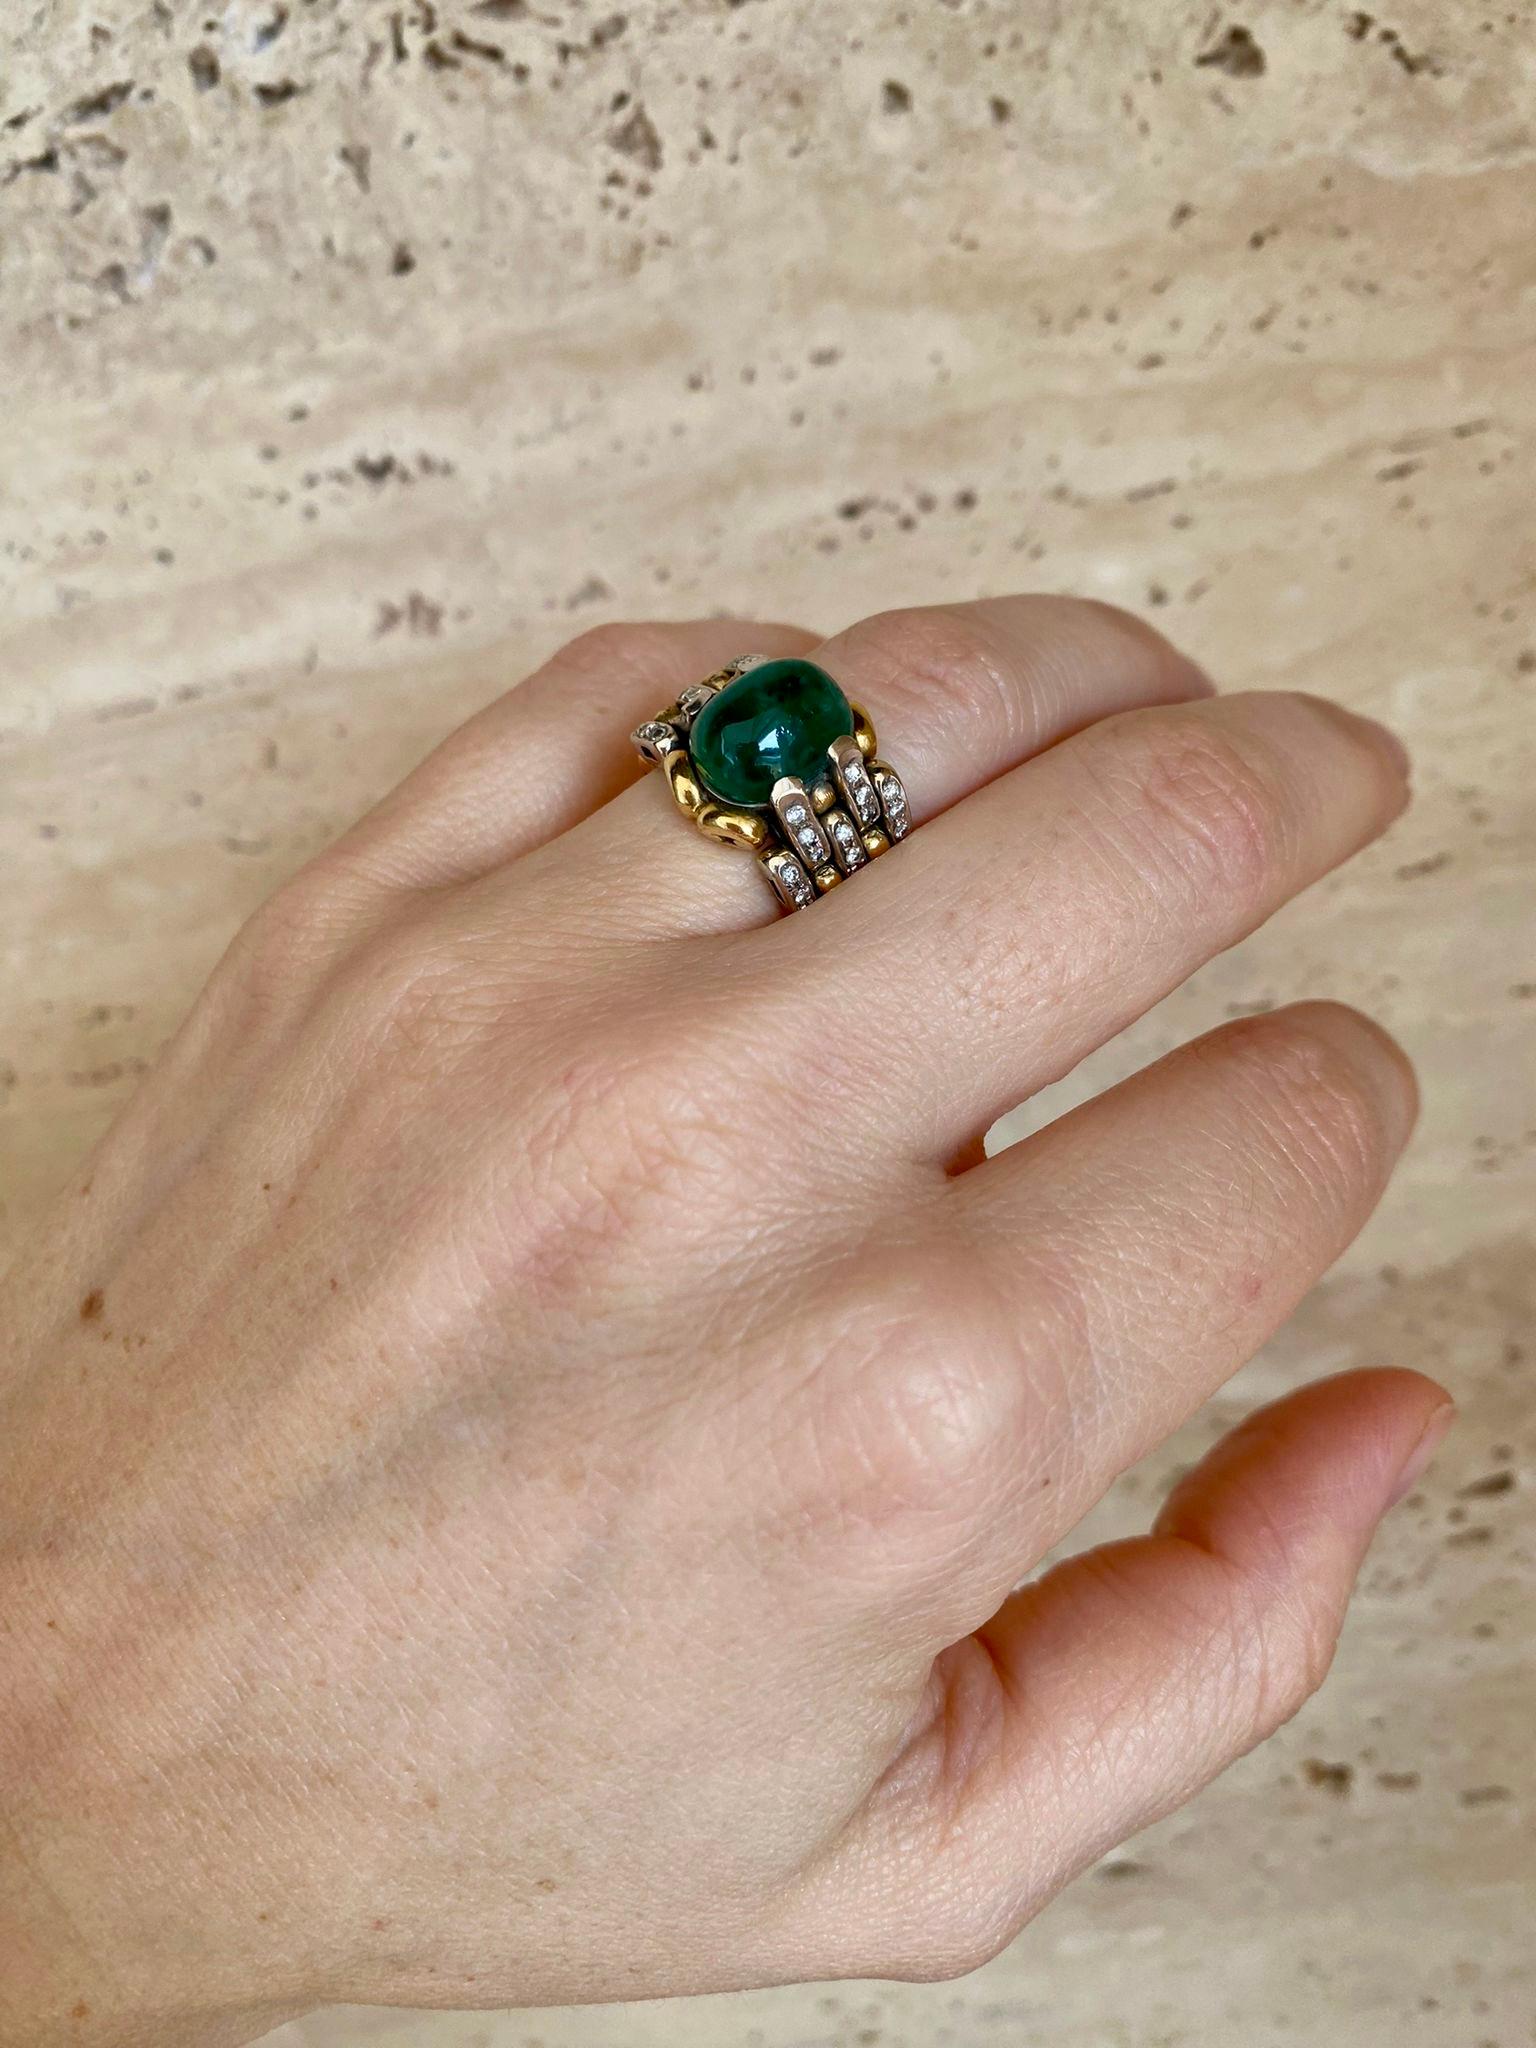 Legnazzi 4.50 Carat Emerald Diamond Cocktail ring In Excellent Condition For Sale In Napoli, Italy